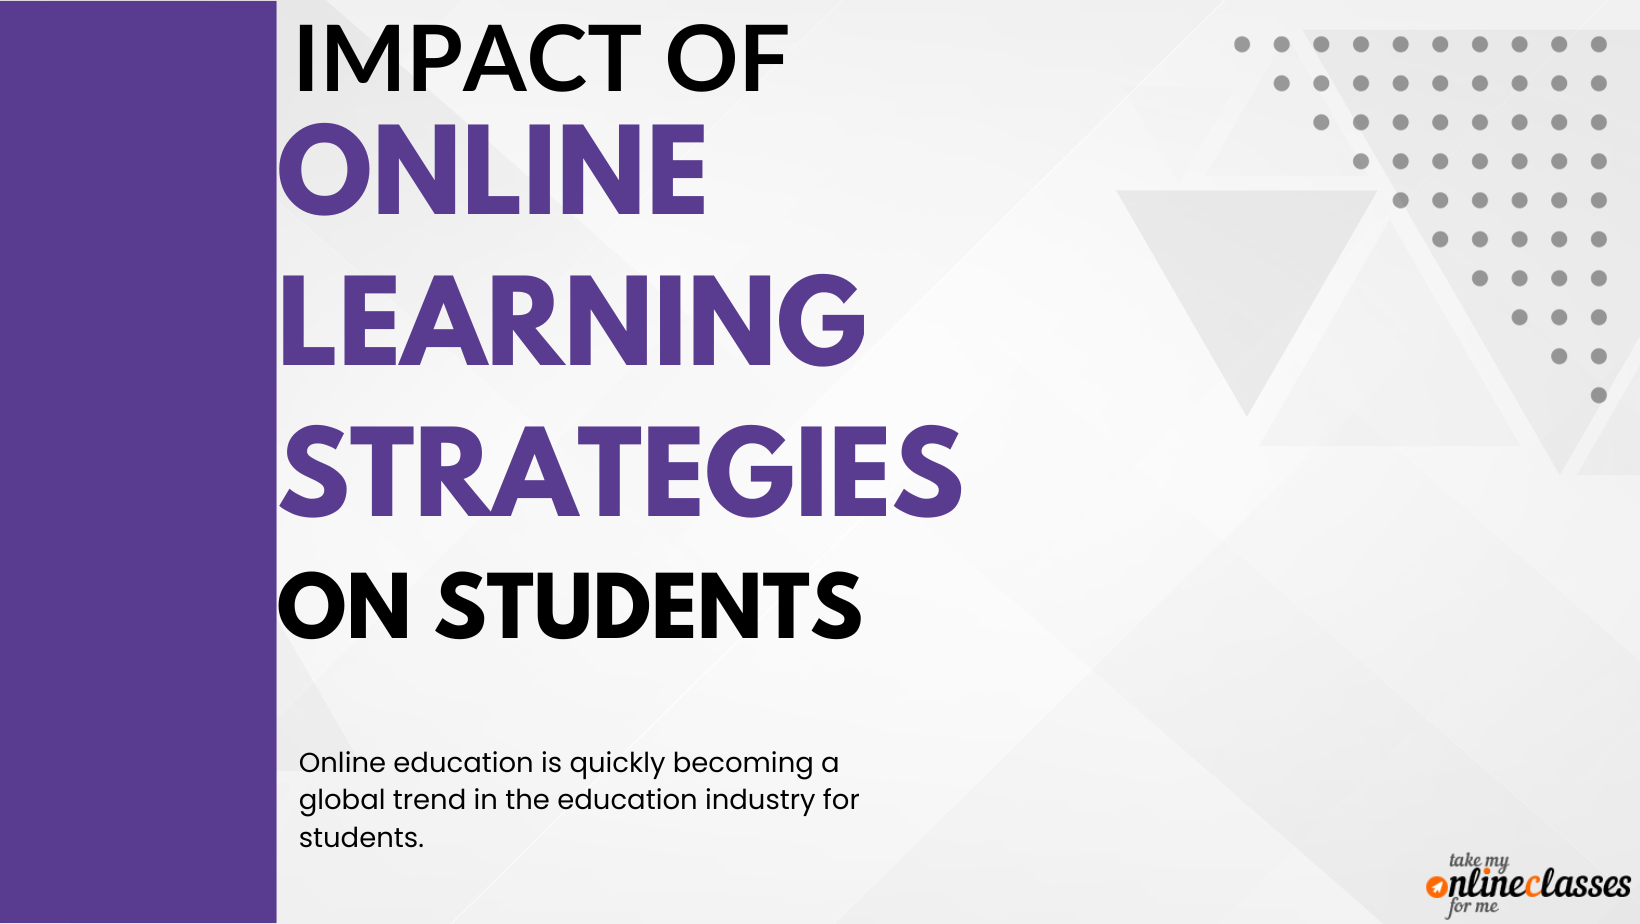 Impact of online learning strategies on students